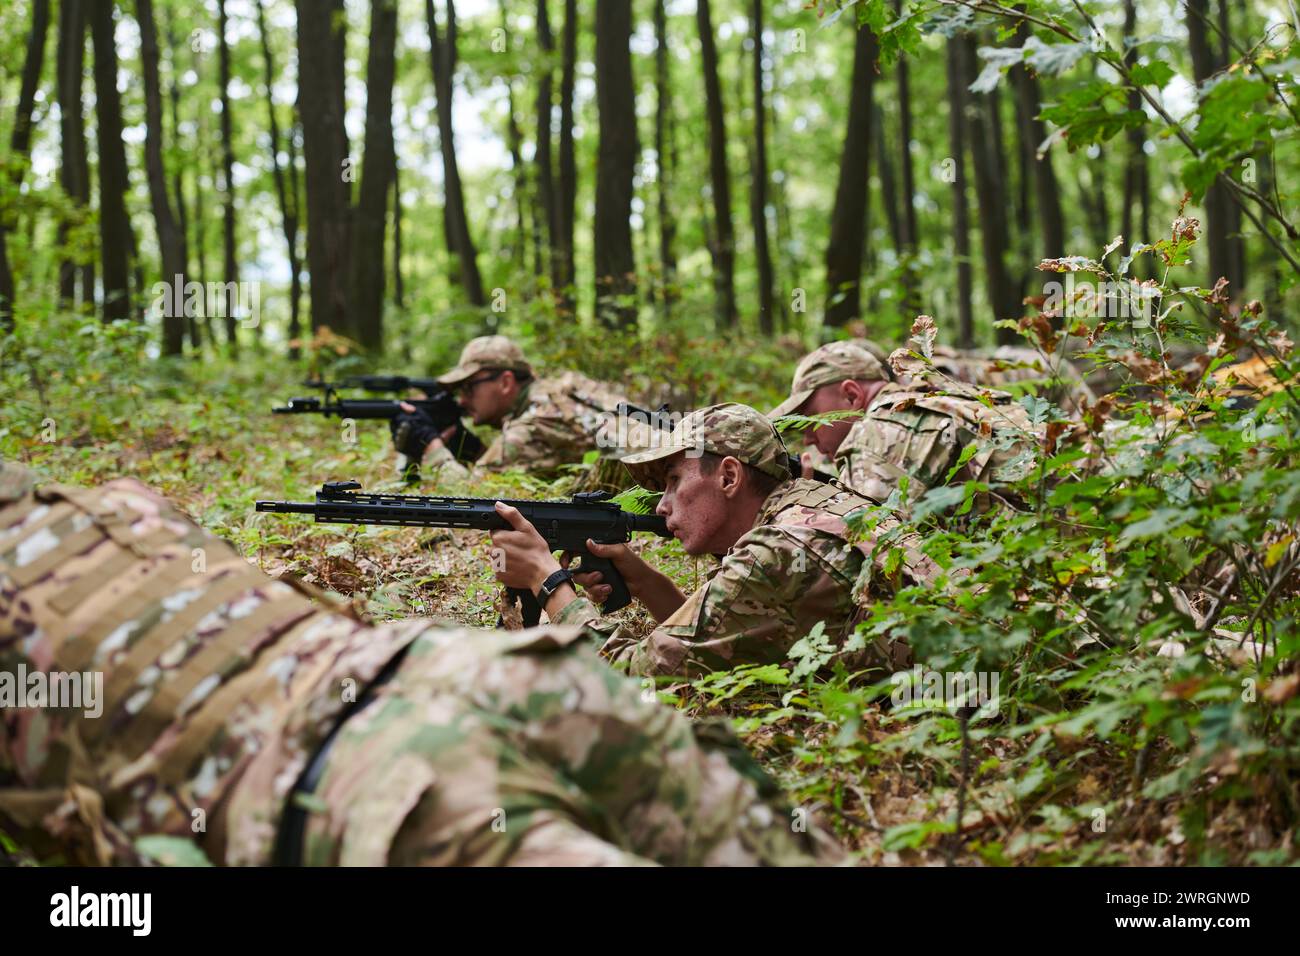 Elite soldiers stealthily maneuver through the dense forest, camouflaged in specialized gear, as they embark on a covert and strategic military Stock Photo